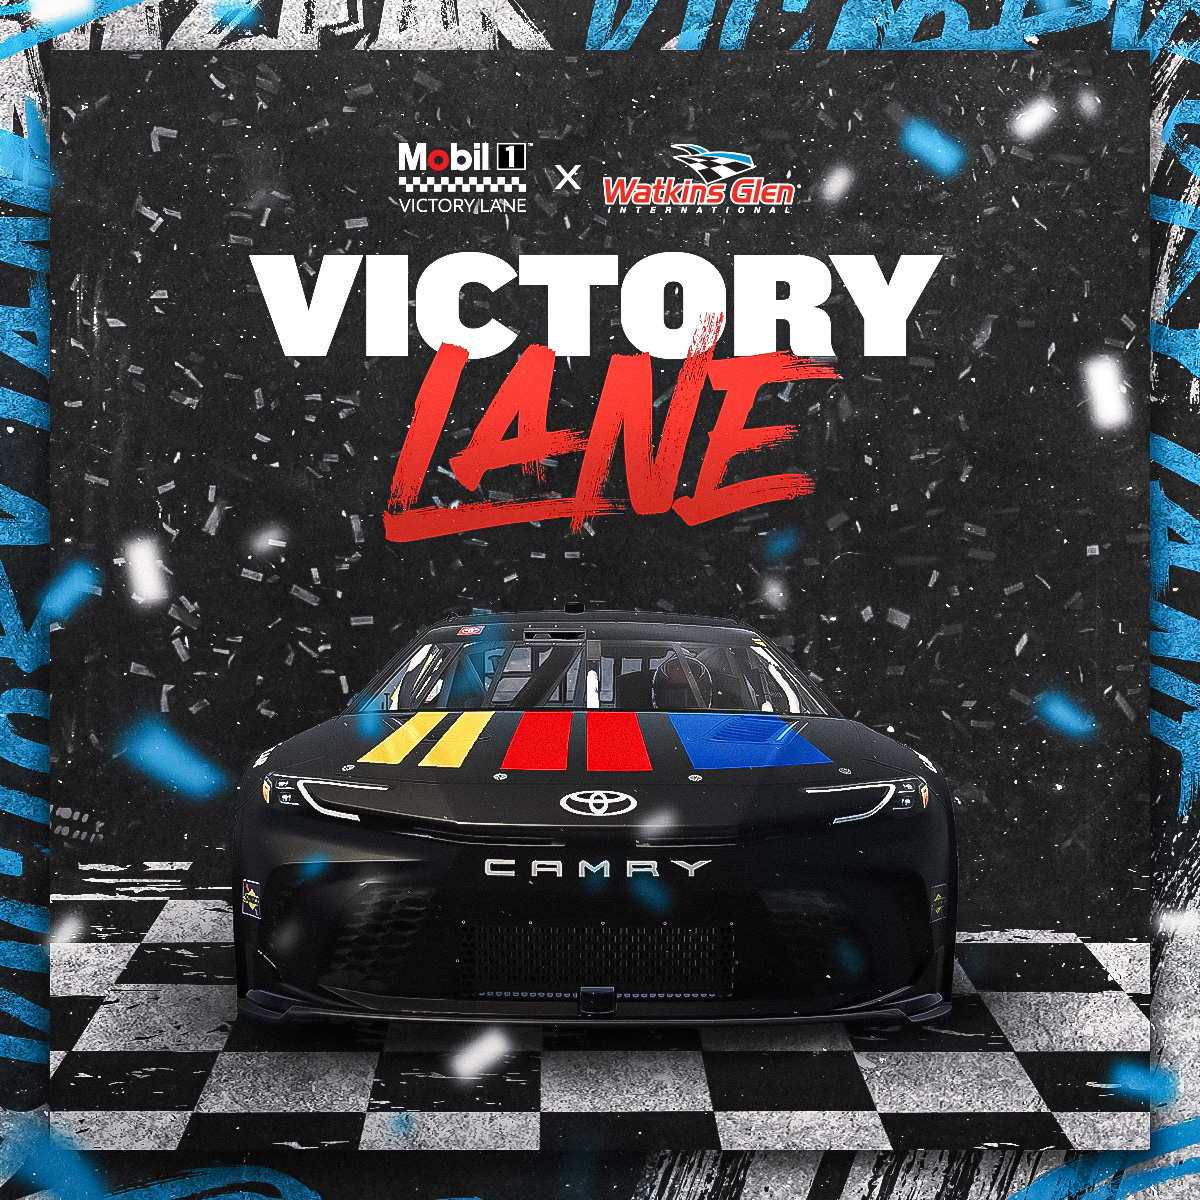 Survive the twists and turns of The Glen, and you'll join @mobil1racing in #Mobil1VictoryLane 🏁 🏎️